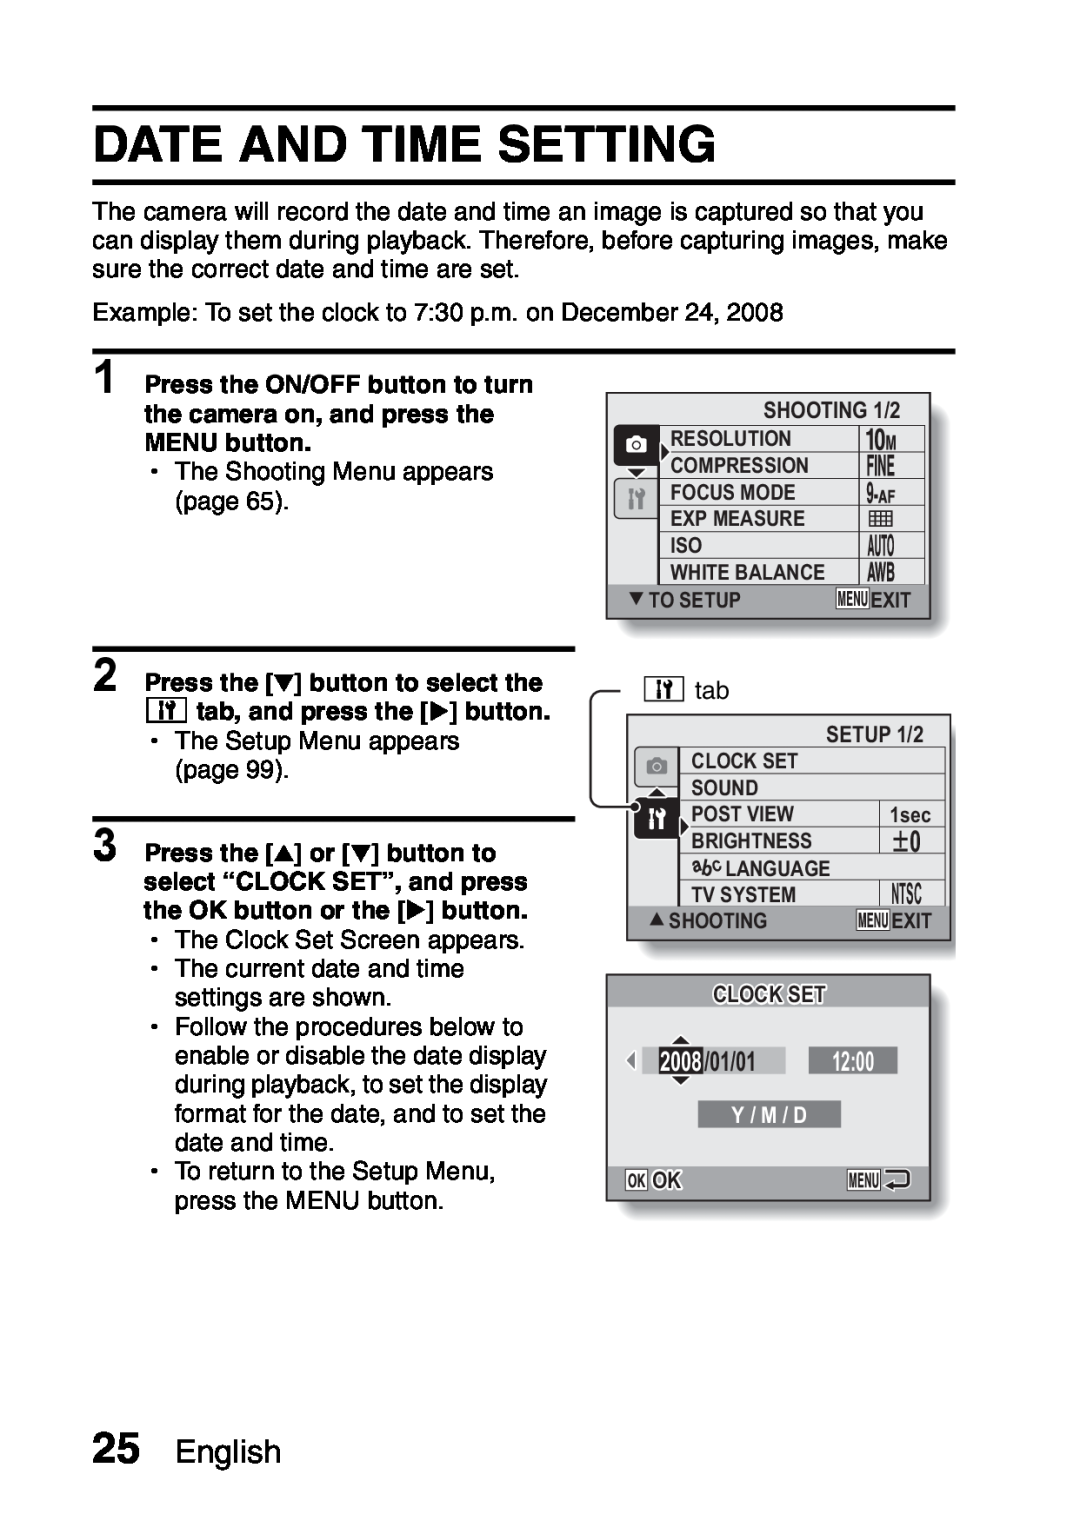 Samsung R50 instruction manual Date And Time Setting, English, 2008/01/01, Press the o button to select the 